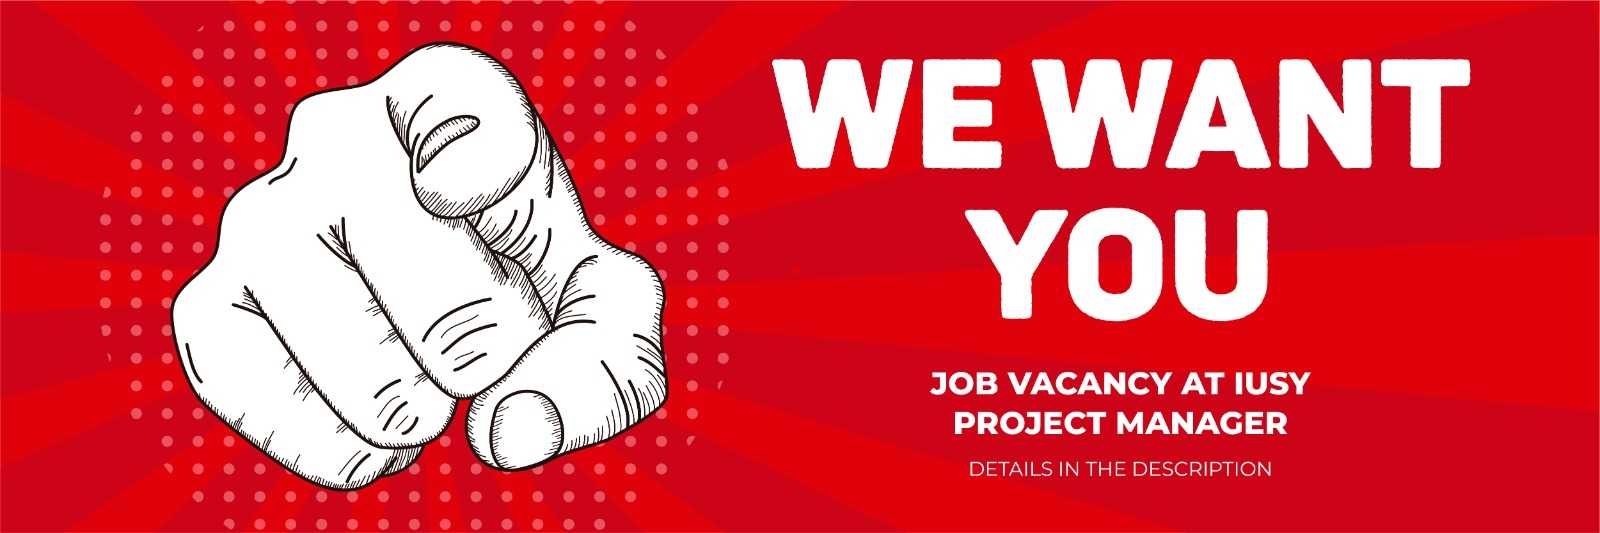 IUSY Project Manager Vacancy